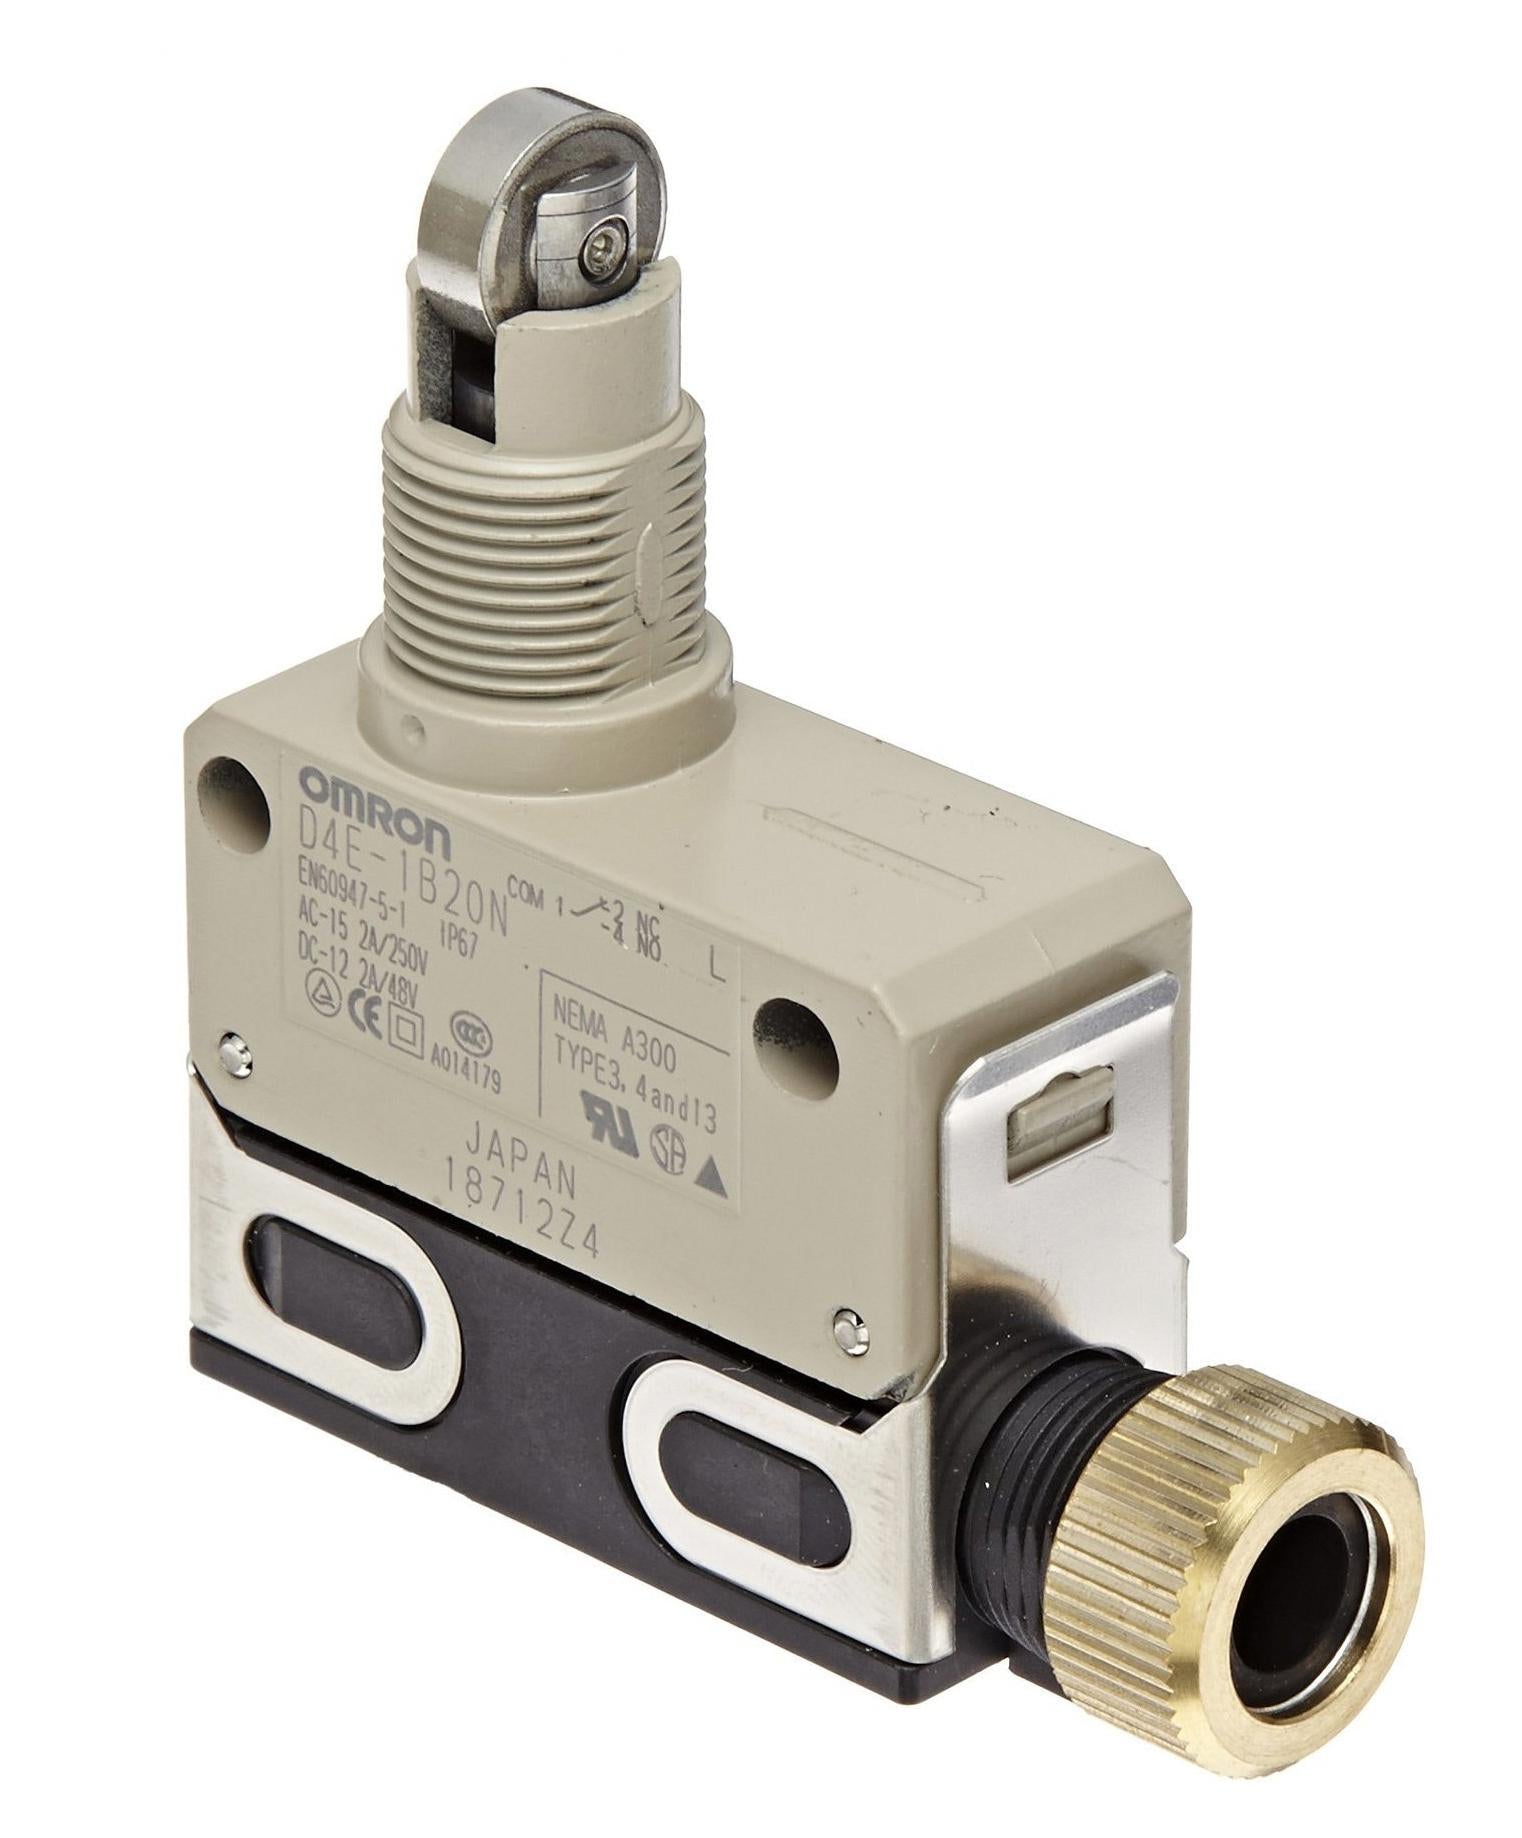 D4E-1B20N LIMIT SWITCH SWITCHES OMRON